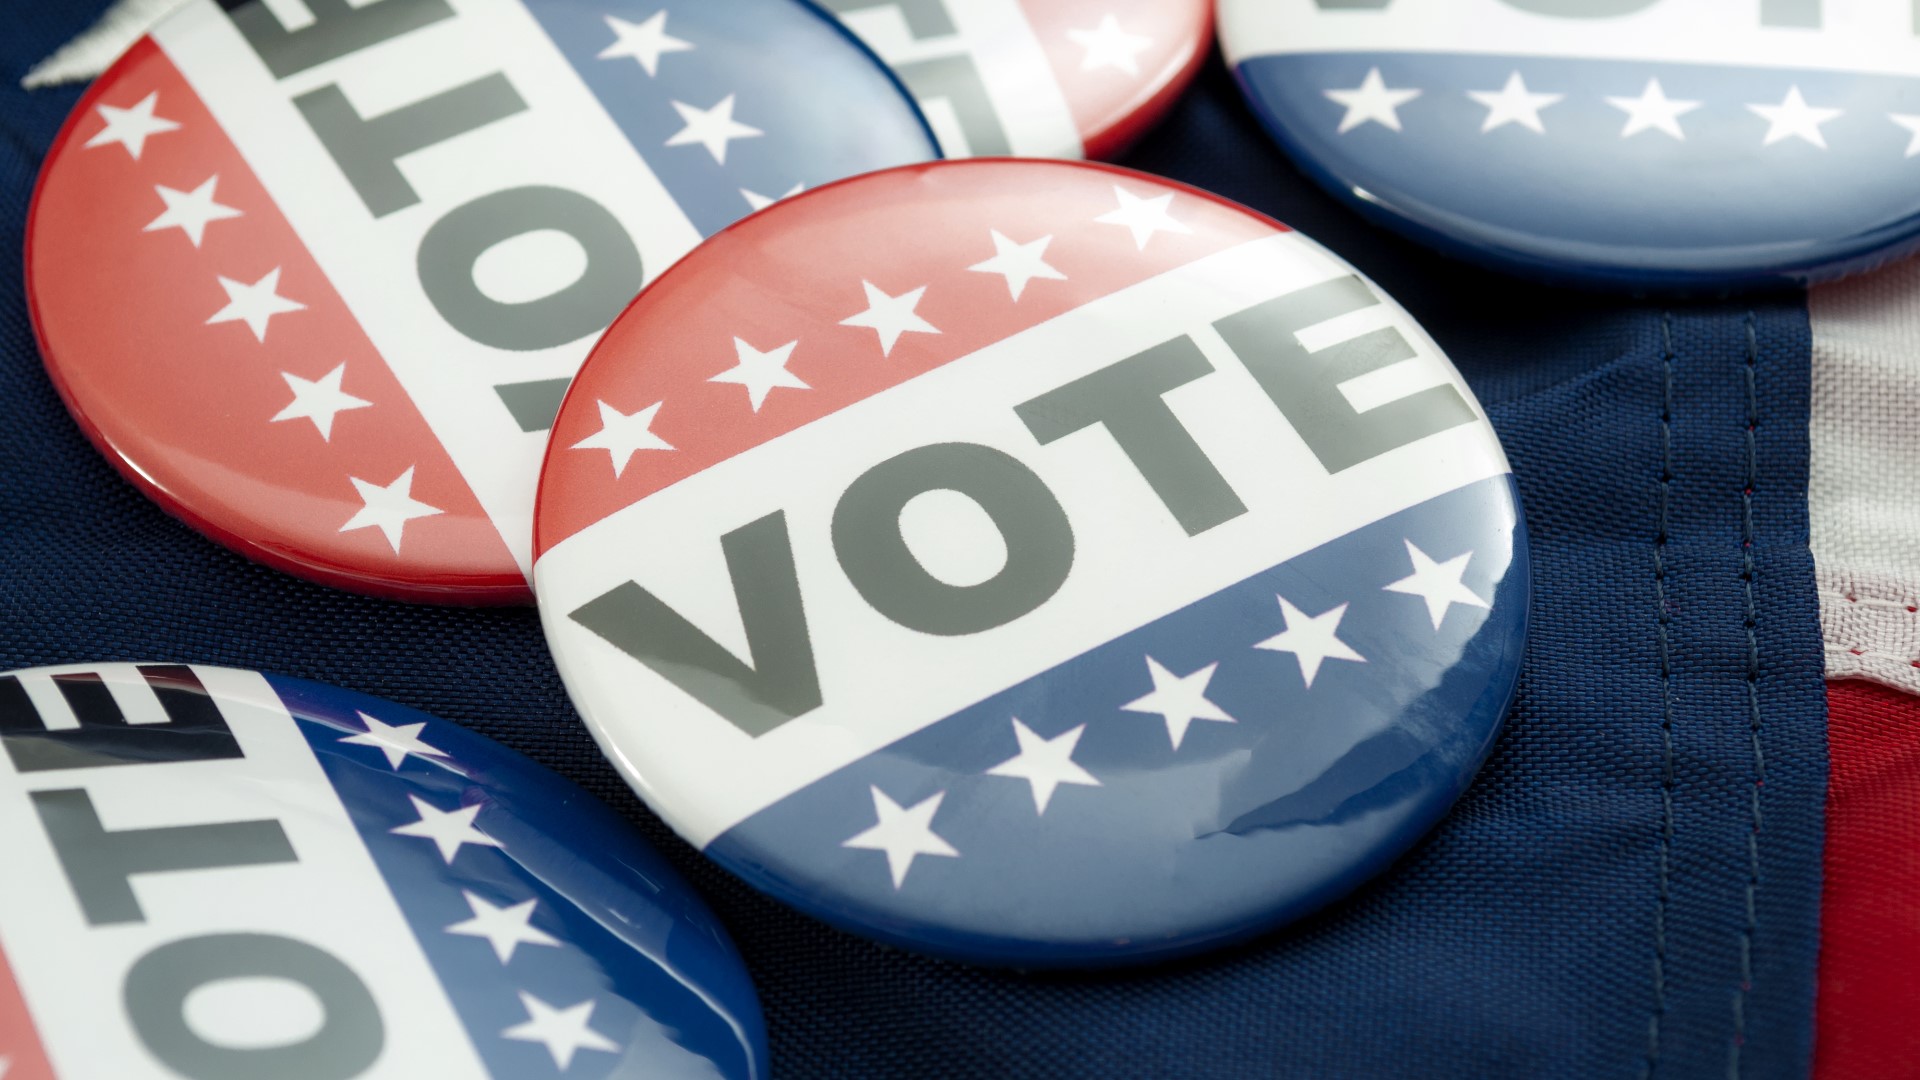 Oldham County and Henry County Clerks posted the locations at which voters can cast their ballot during the 2020 General Election.